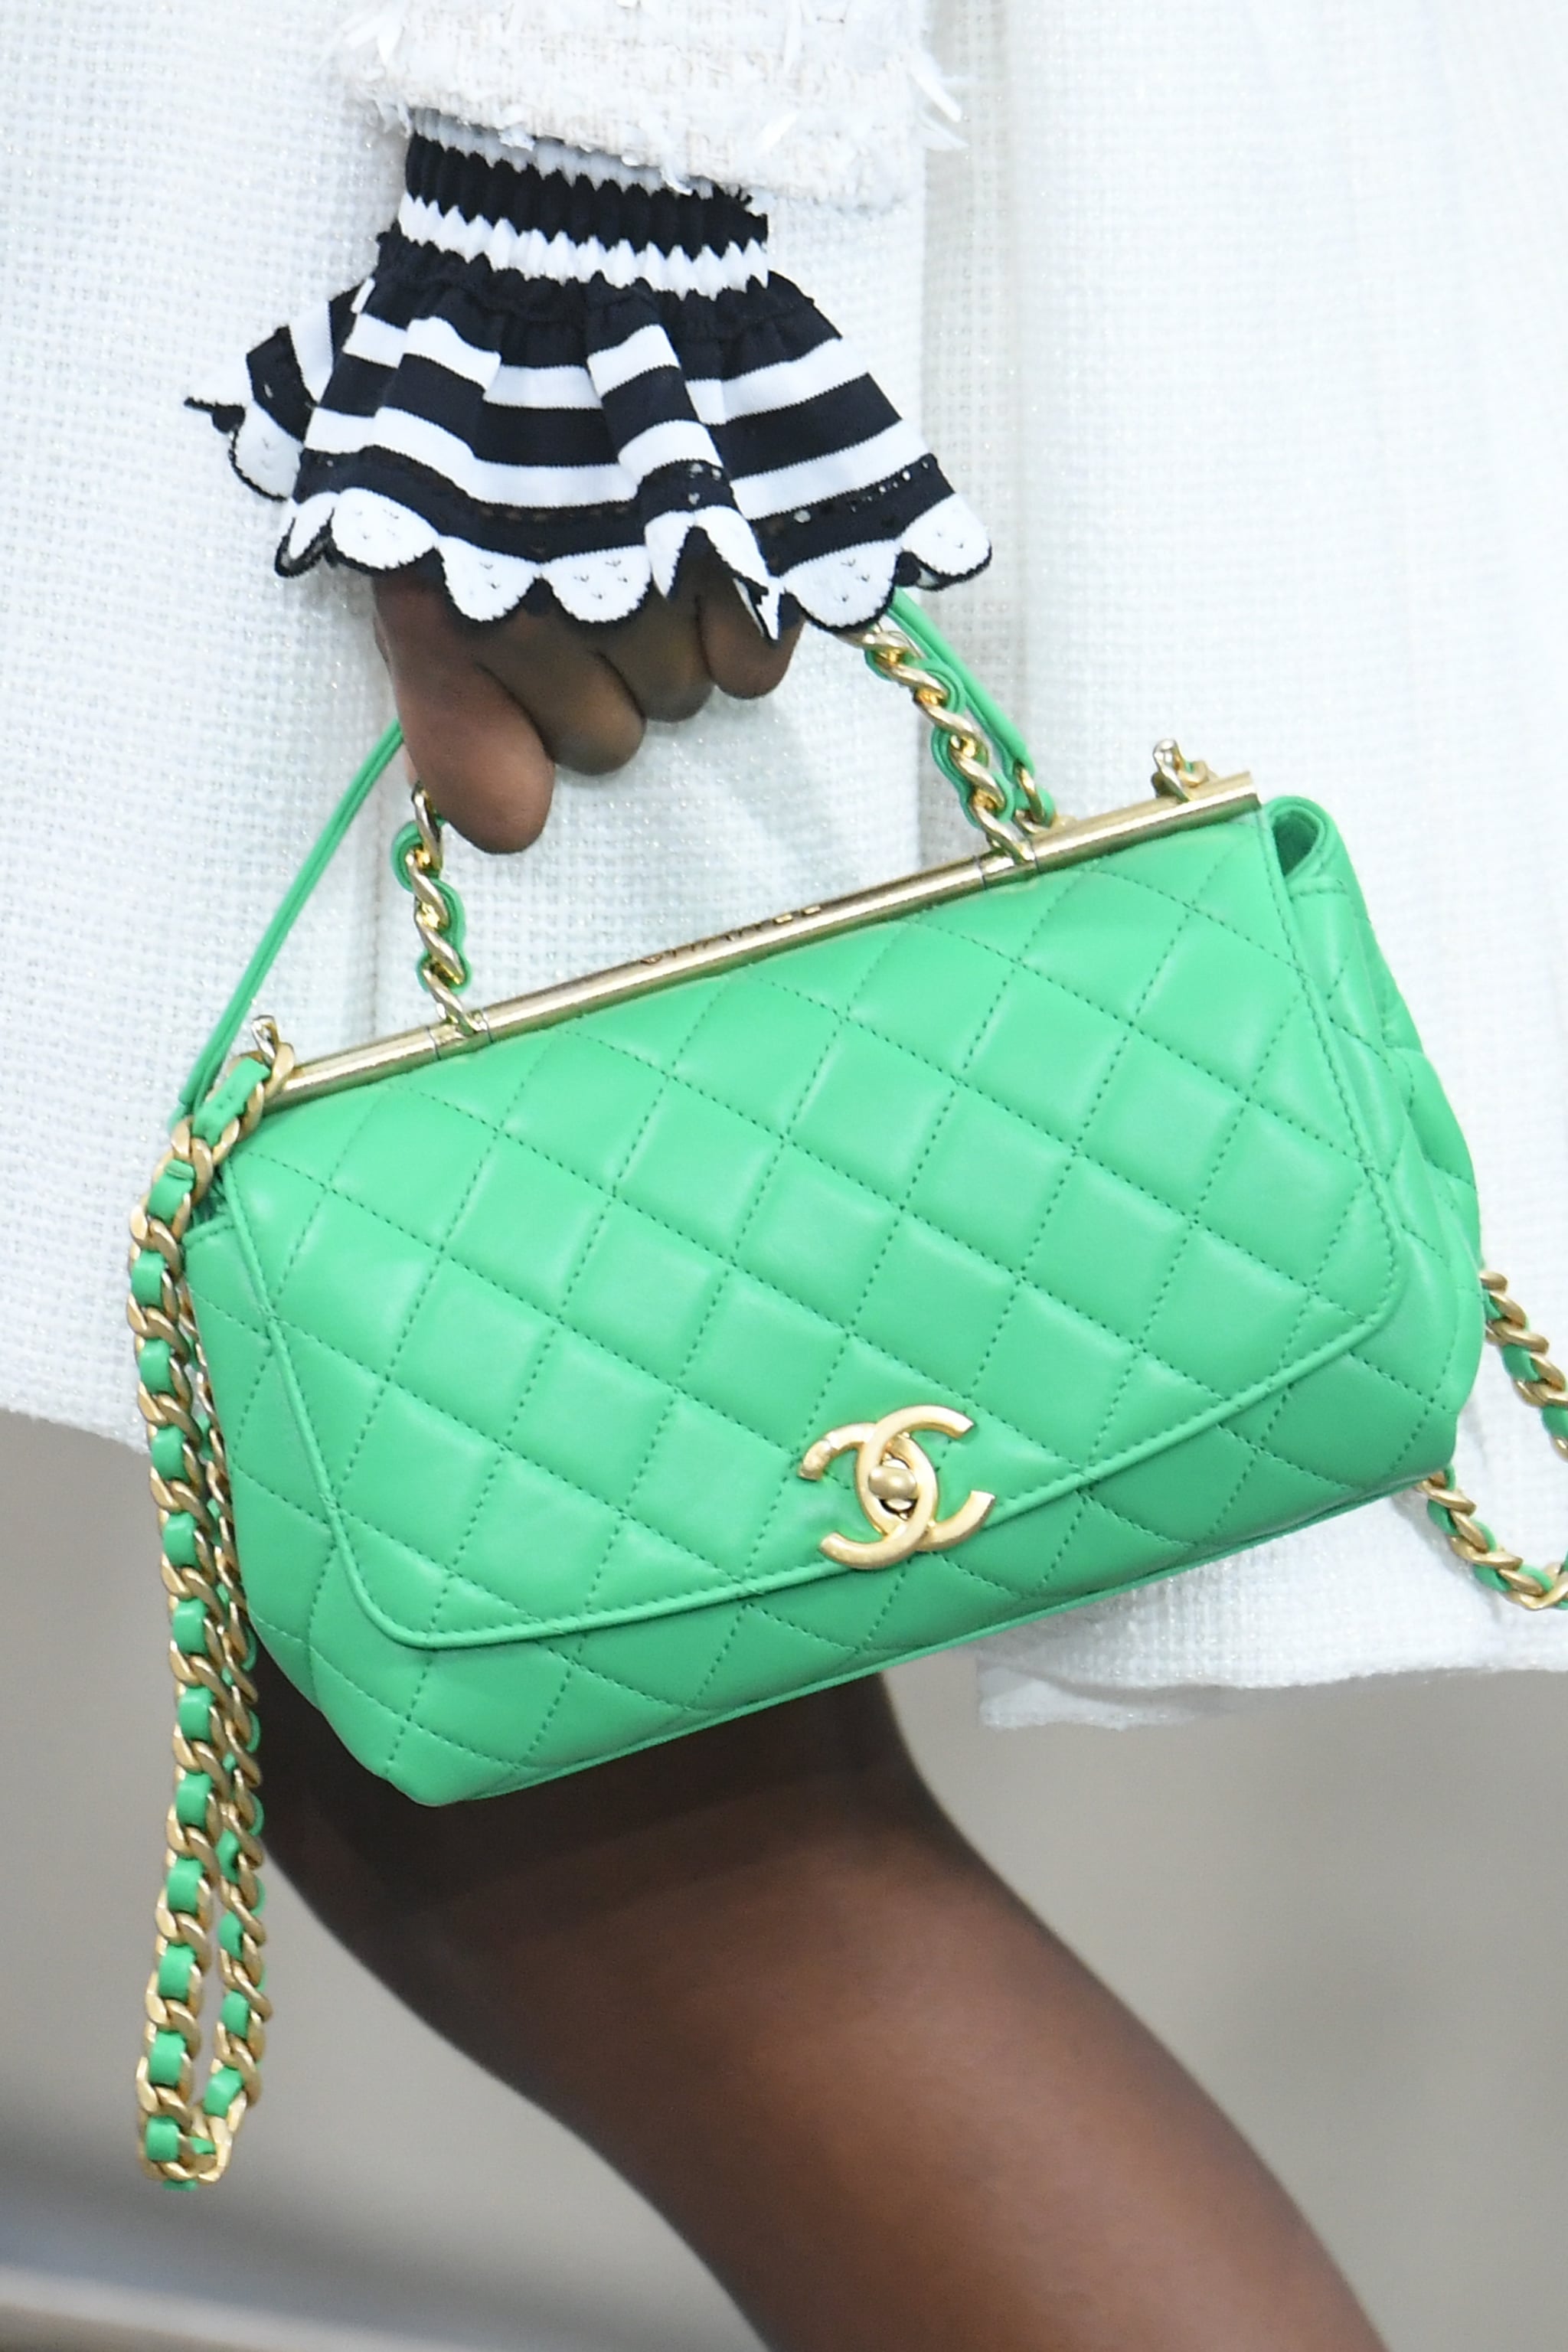 Chanel Just Gave Us the Walkable Flats of Our Dreams (and a Neon Green Bag  We Never Knew We Needed)